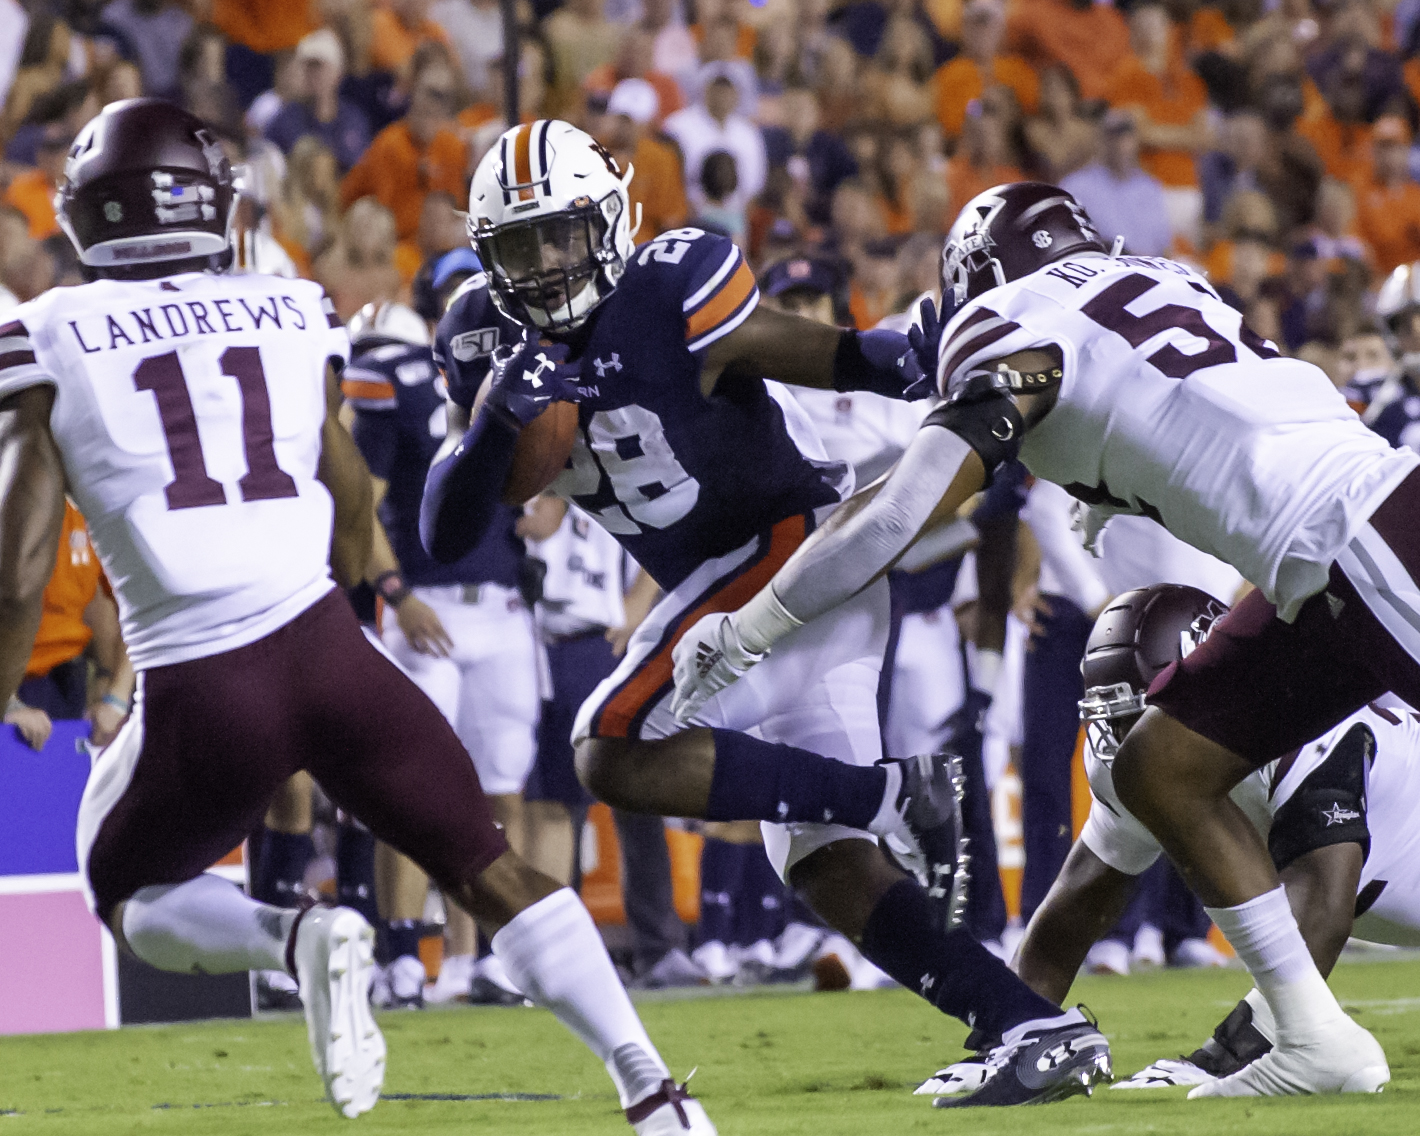 Auburn smashes Mississippi State 56-23 on Saturday; moves to 5-0 overall, 2-0 in the SEC